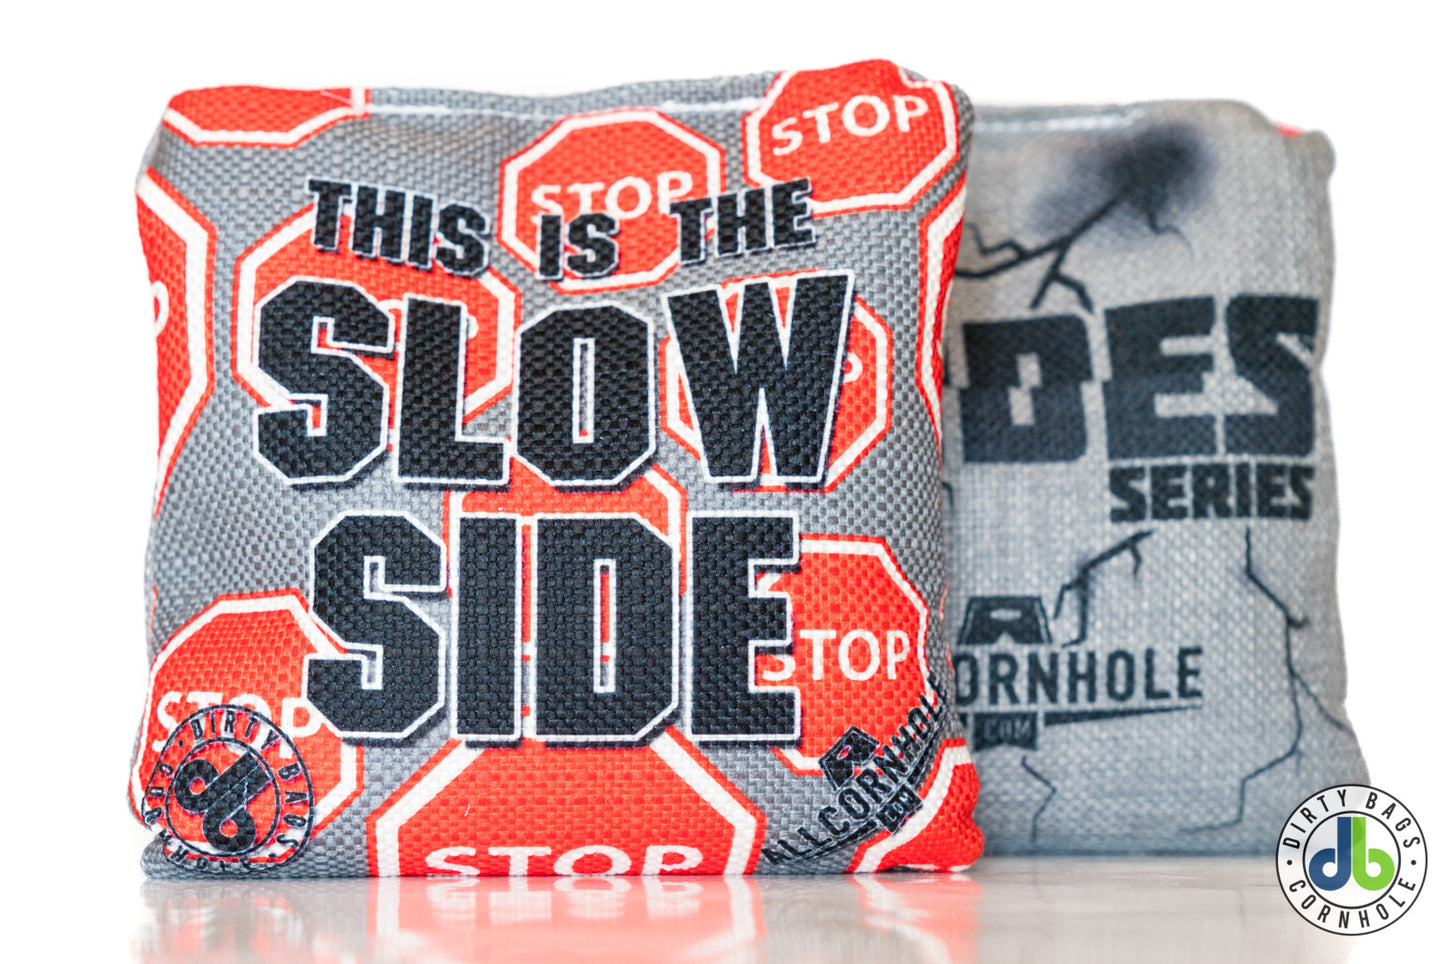 All Slides - "This is the slow side" edition (Set of 4 Bags)